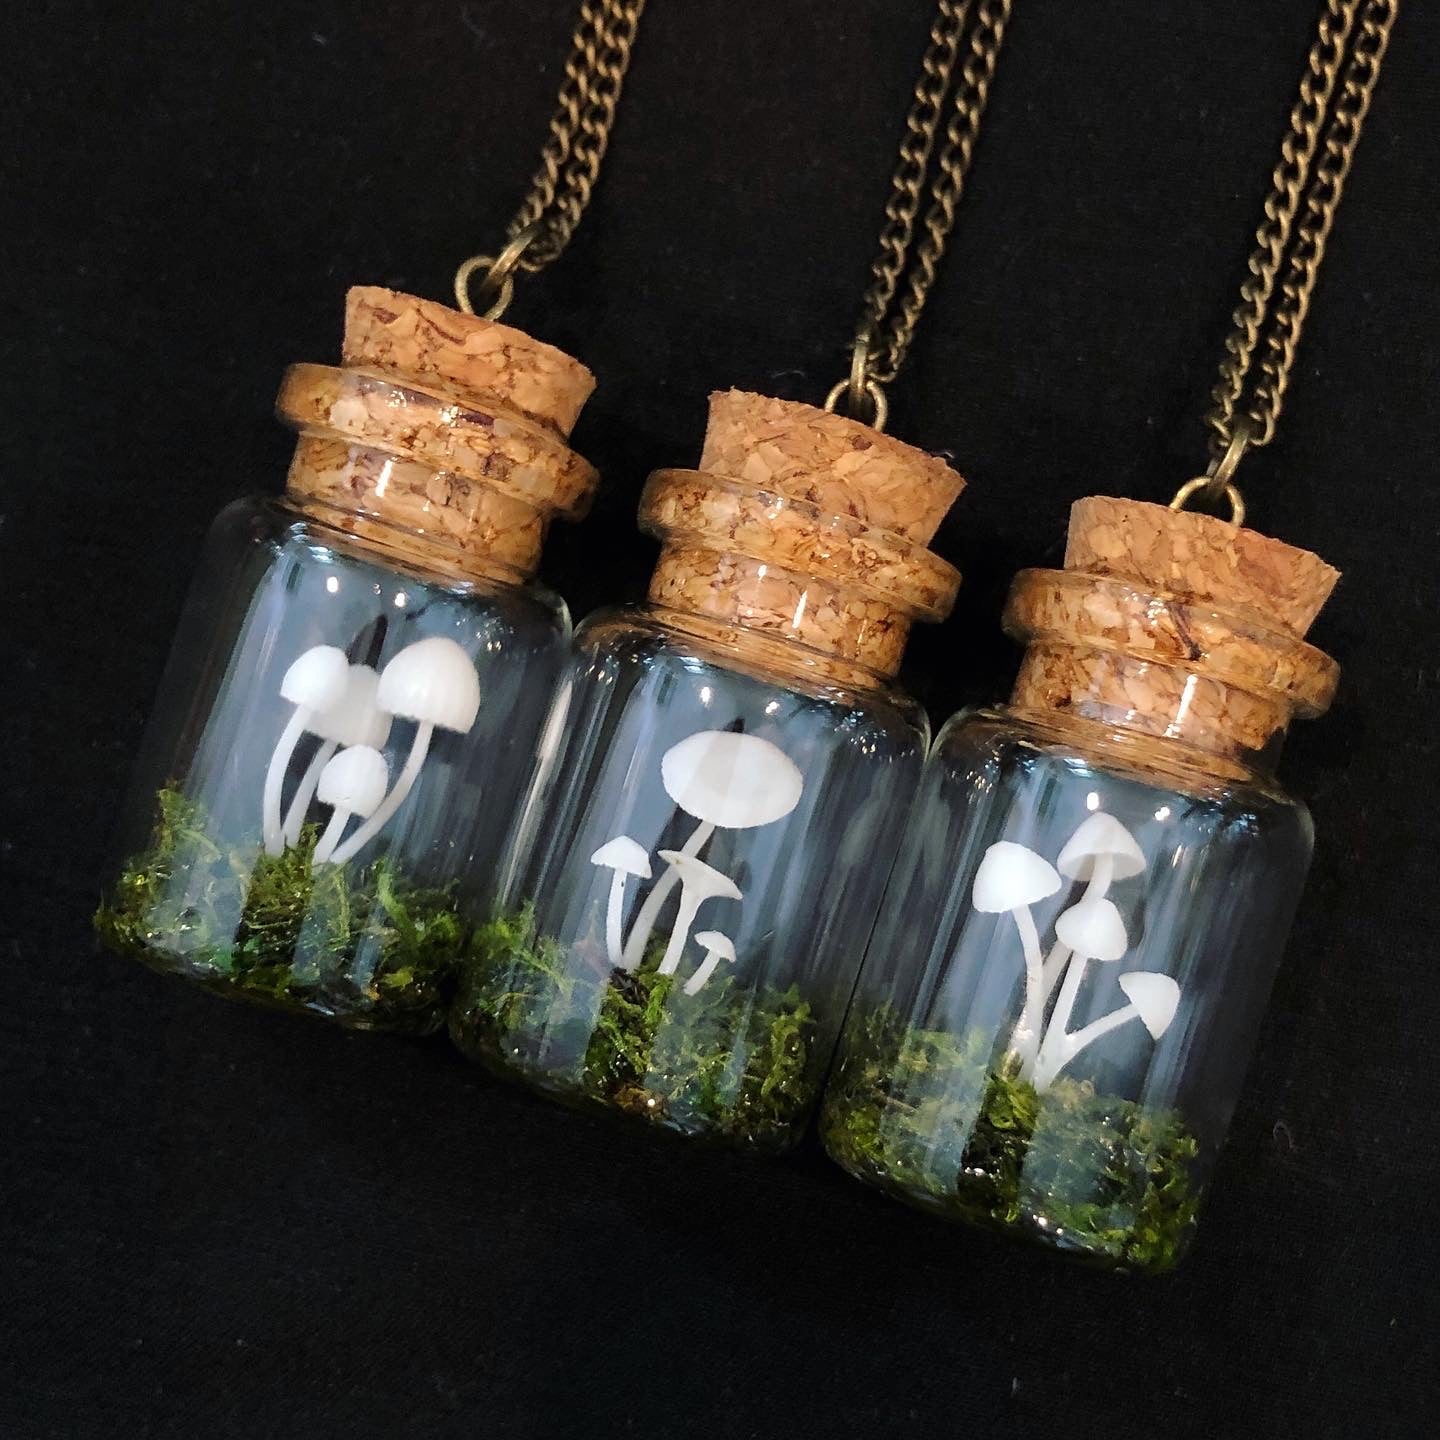 Mad Hatler's Designs - bottle of fungi necklace